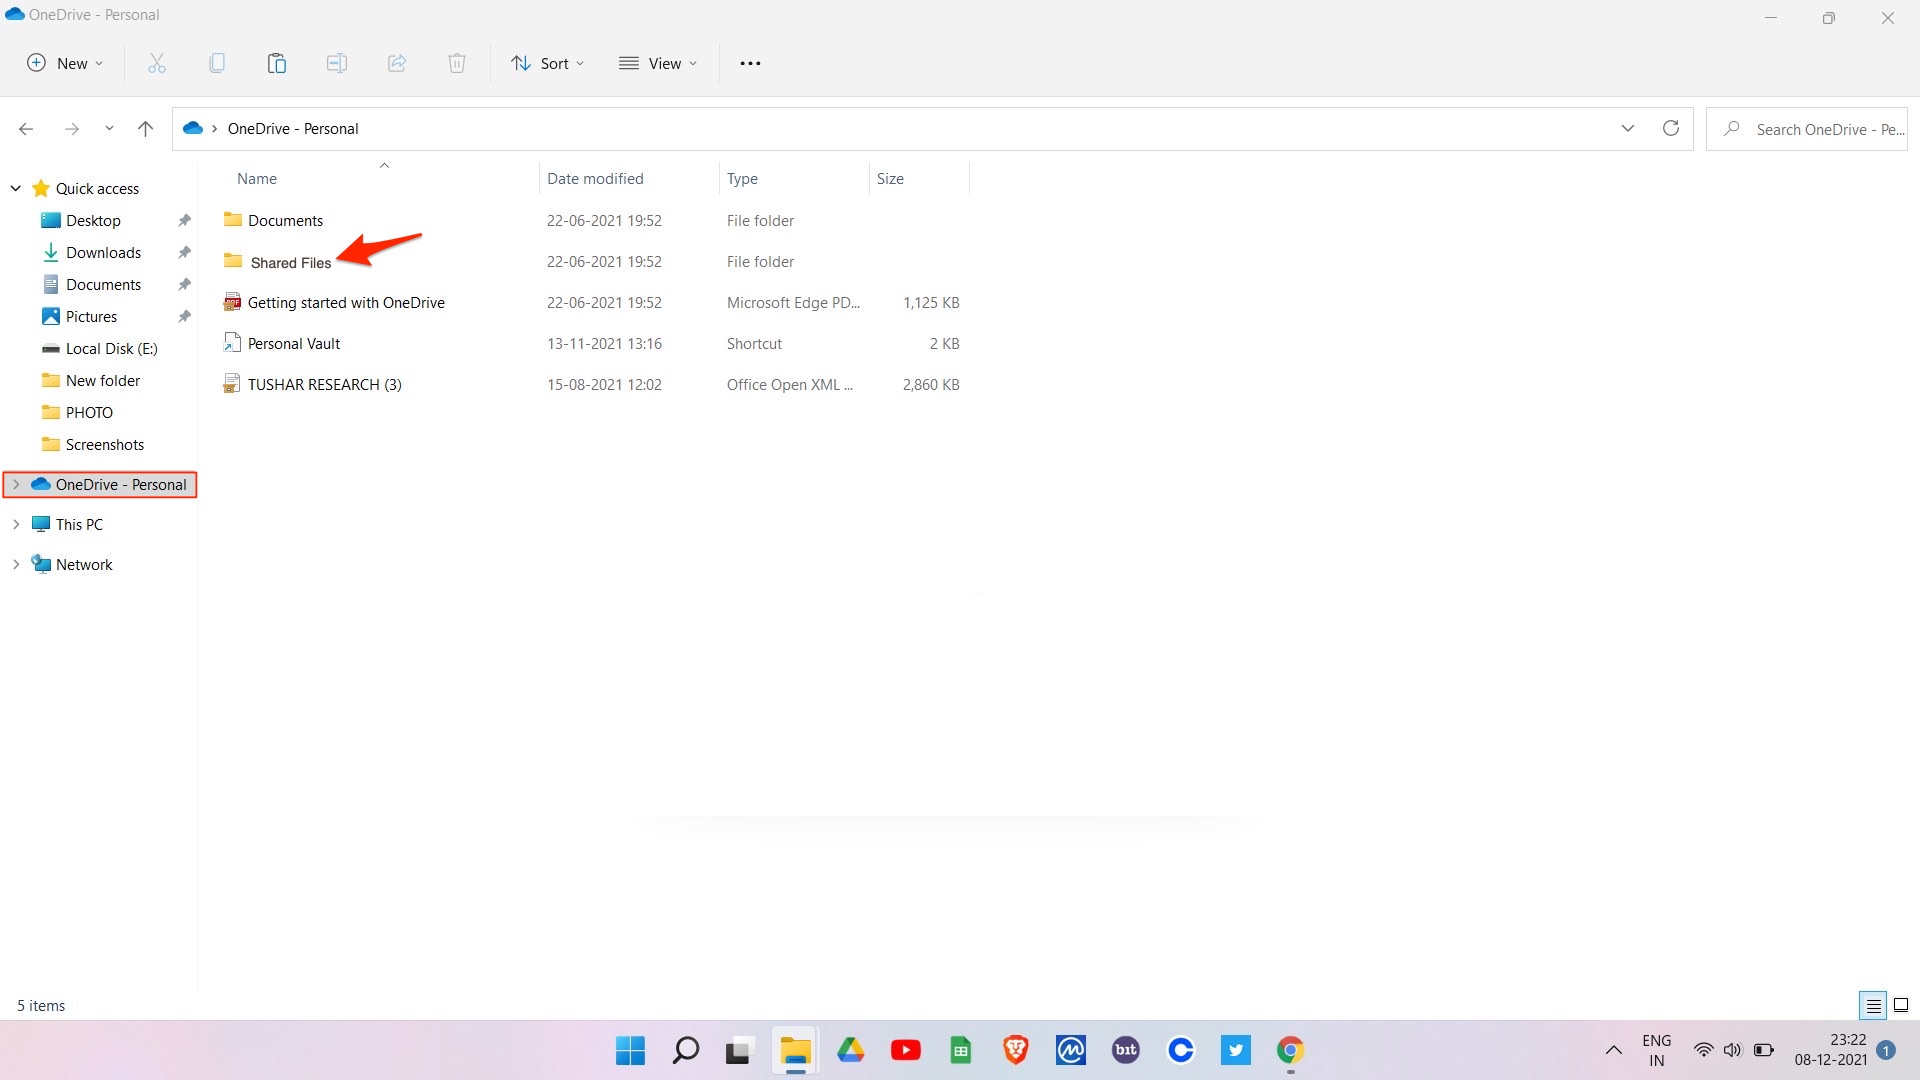 Shared Files on OneDrive